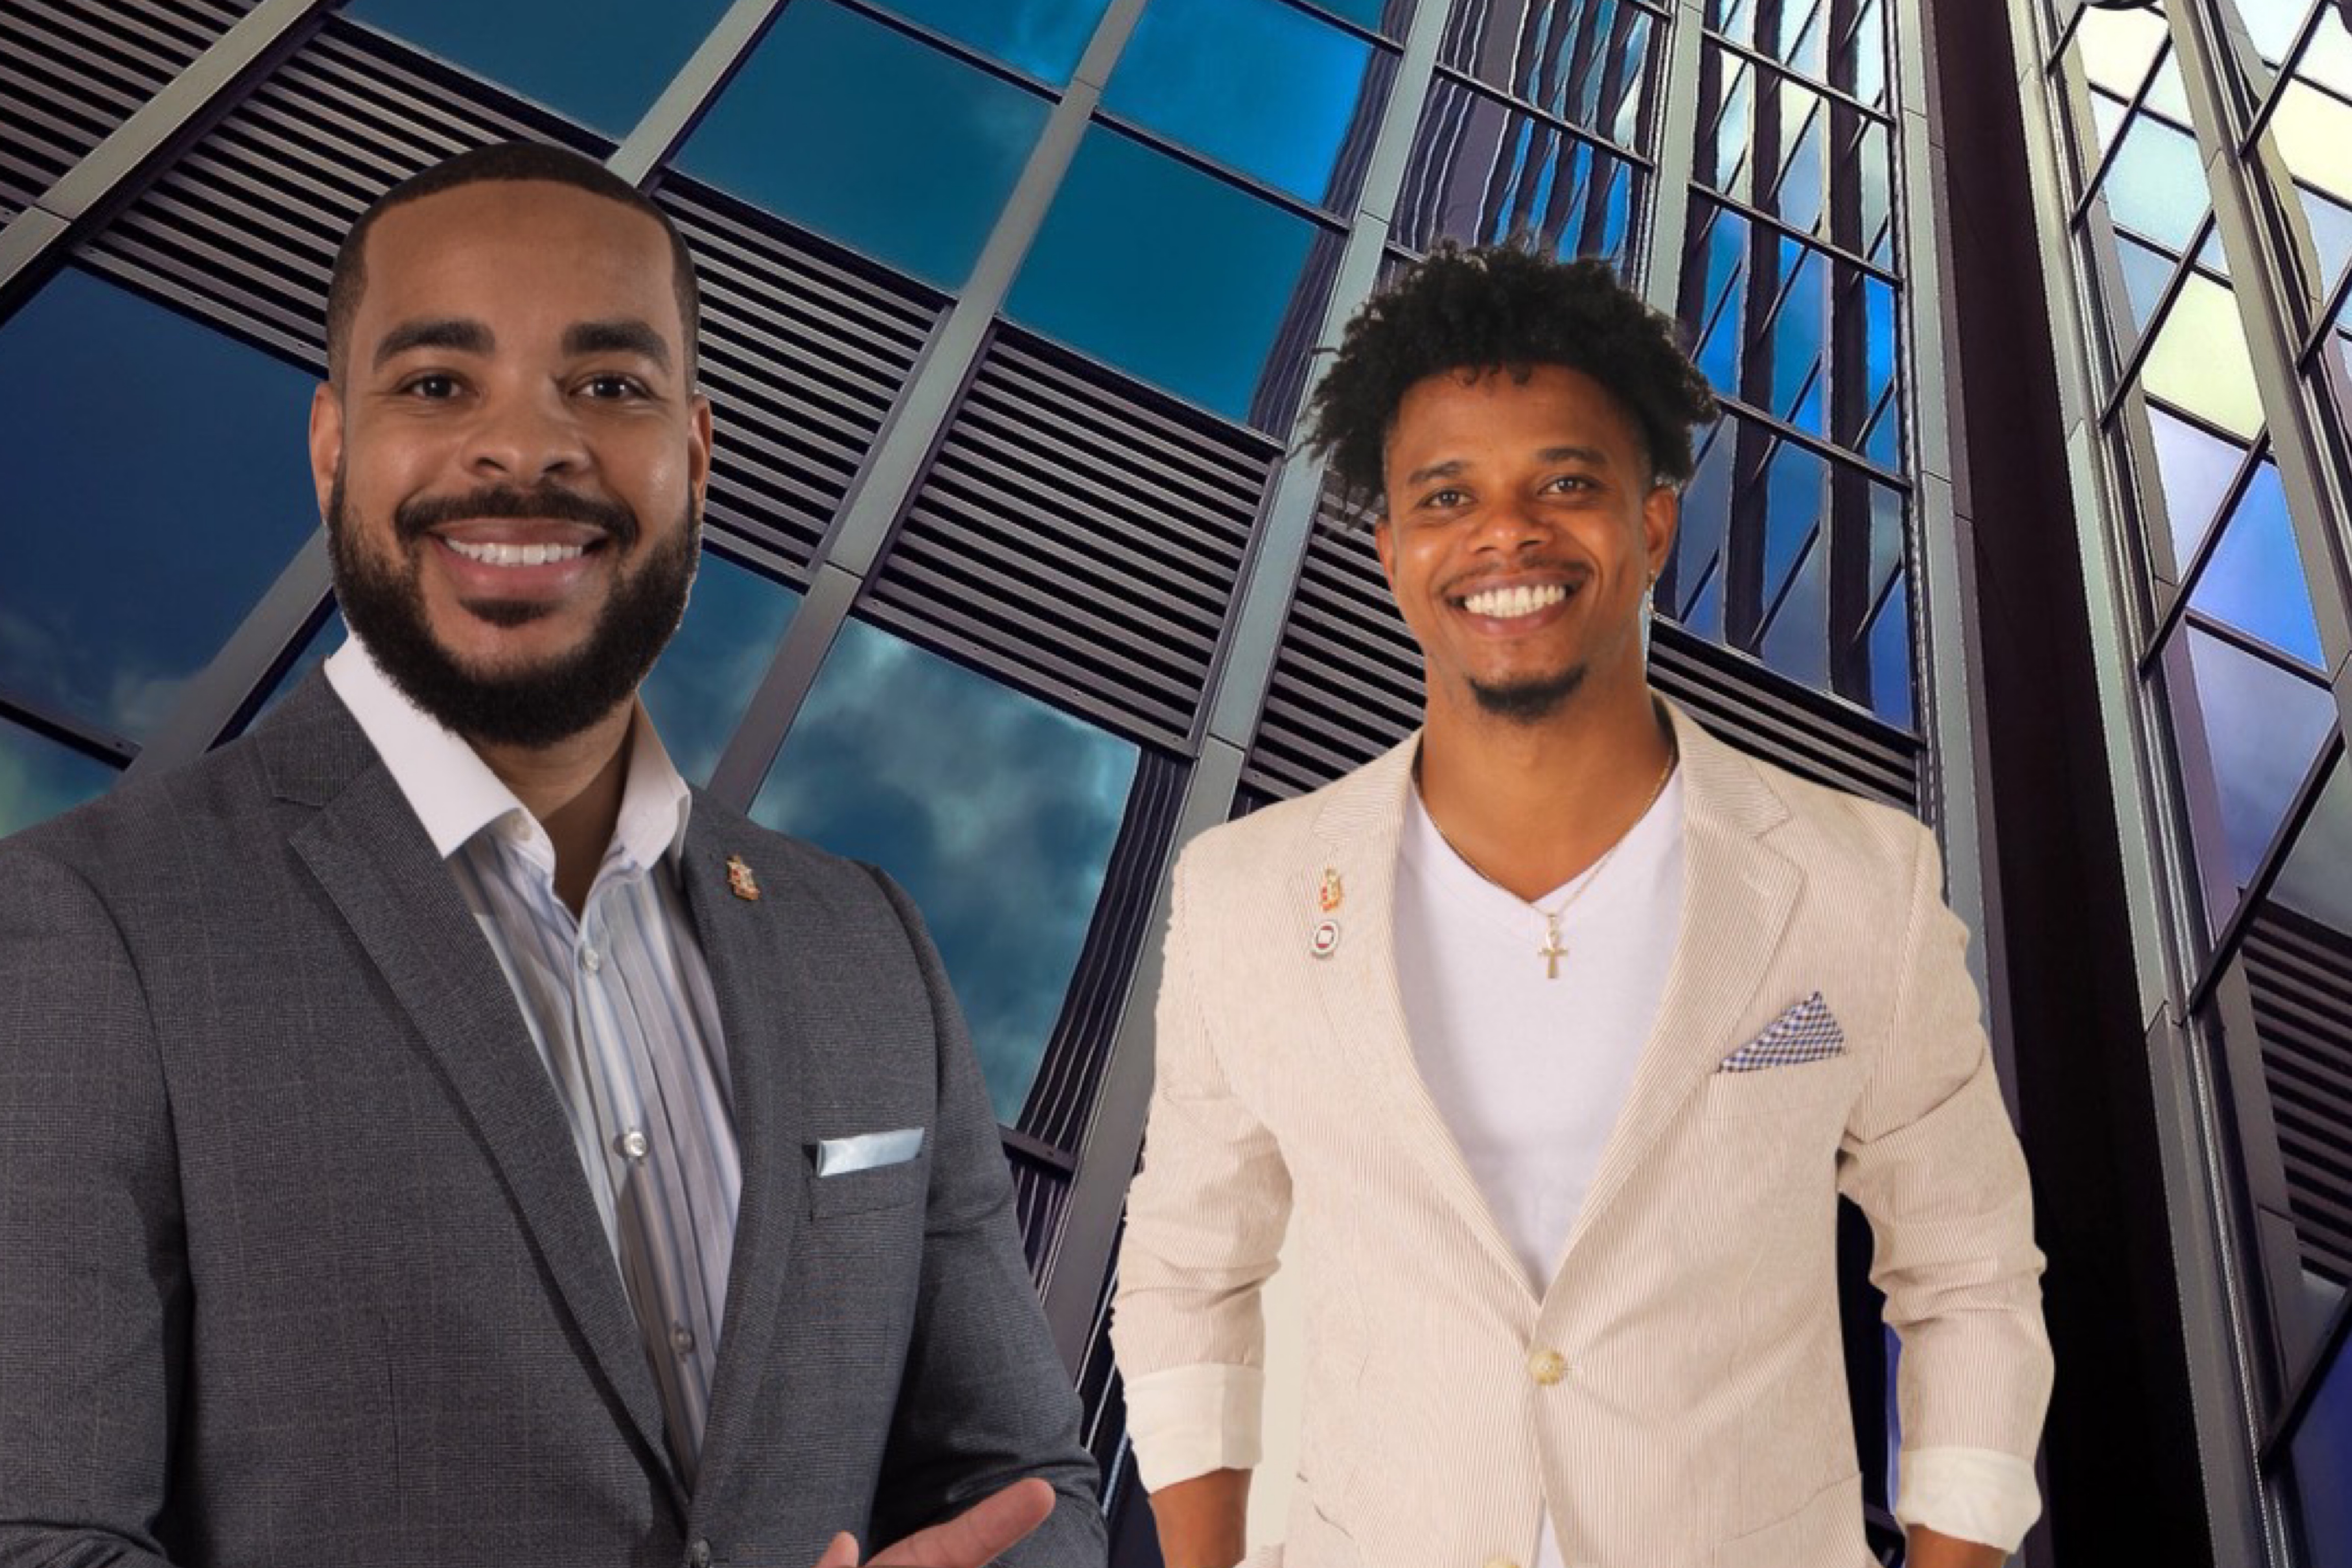 These HBCU Grads Are Behind The First Black-Owned Alcohol Delivery Service